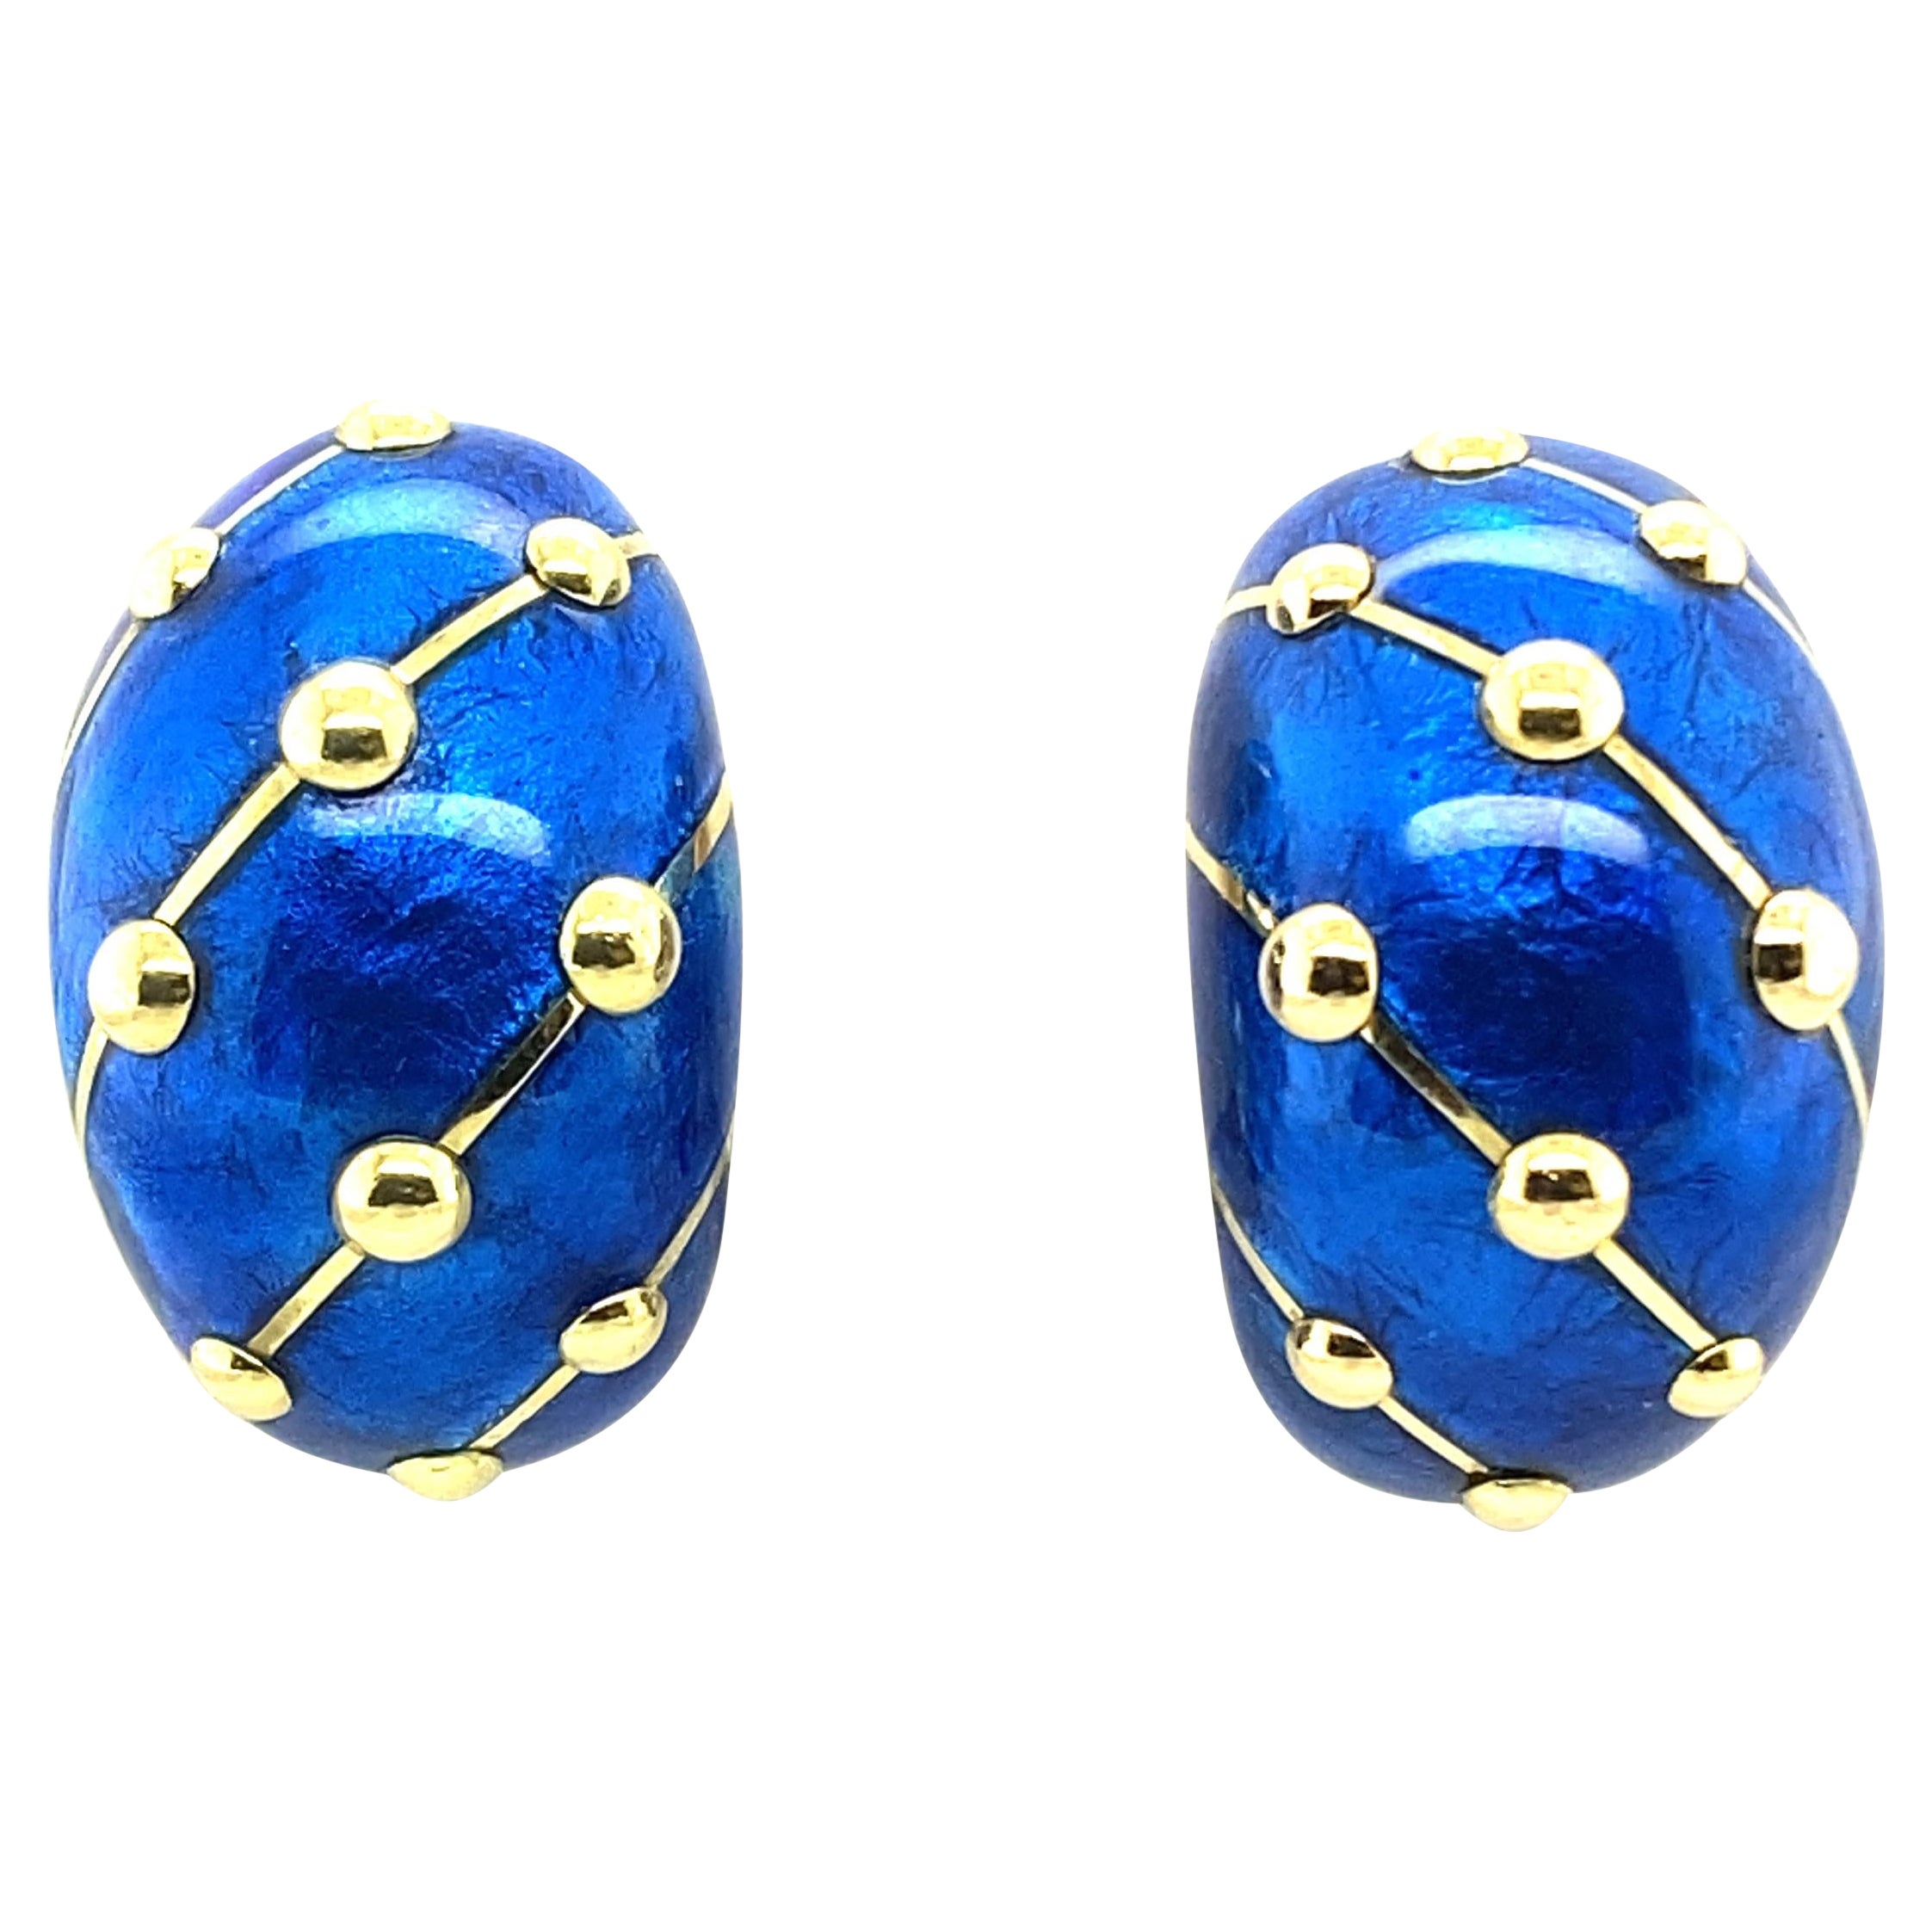 Pair of Gold and Blue Paillonné Enamel 'Banana' Earrings by Jean Schlumberger